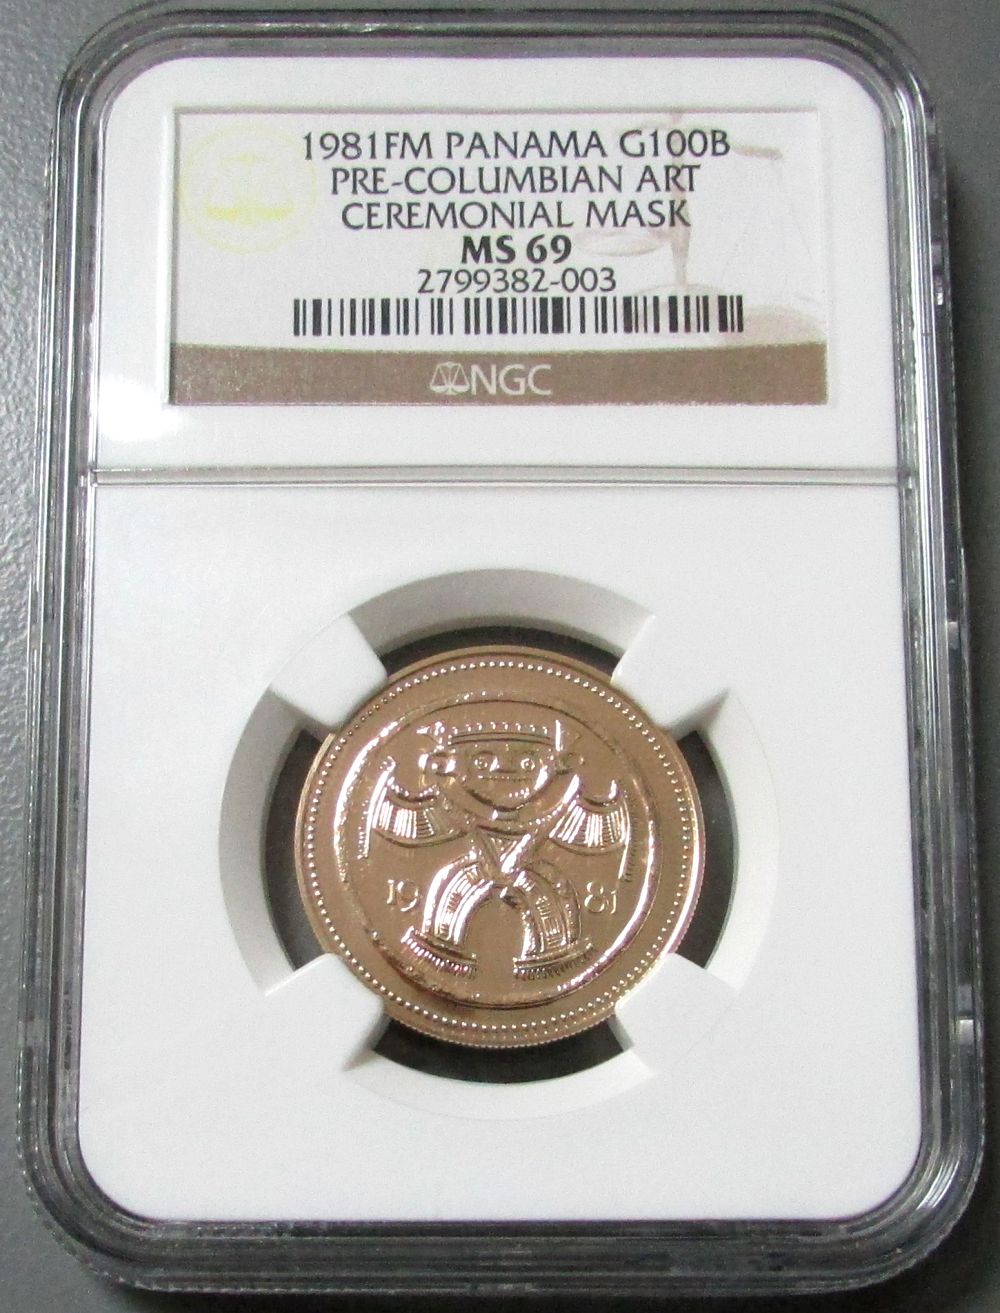 1981 FM GOLD PANAMA FRANKLIN MINT ARCHIVES 100 BALBOA CEREMONIAL MASK NGC MINT STATE 69 ONLY 174 MINTED 